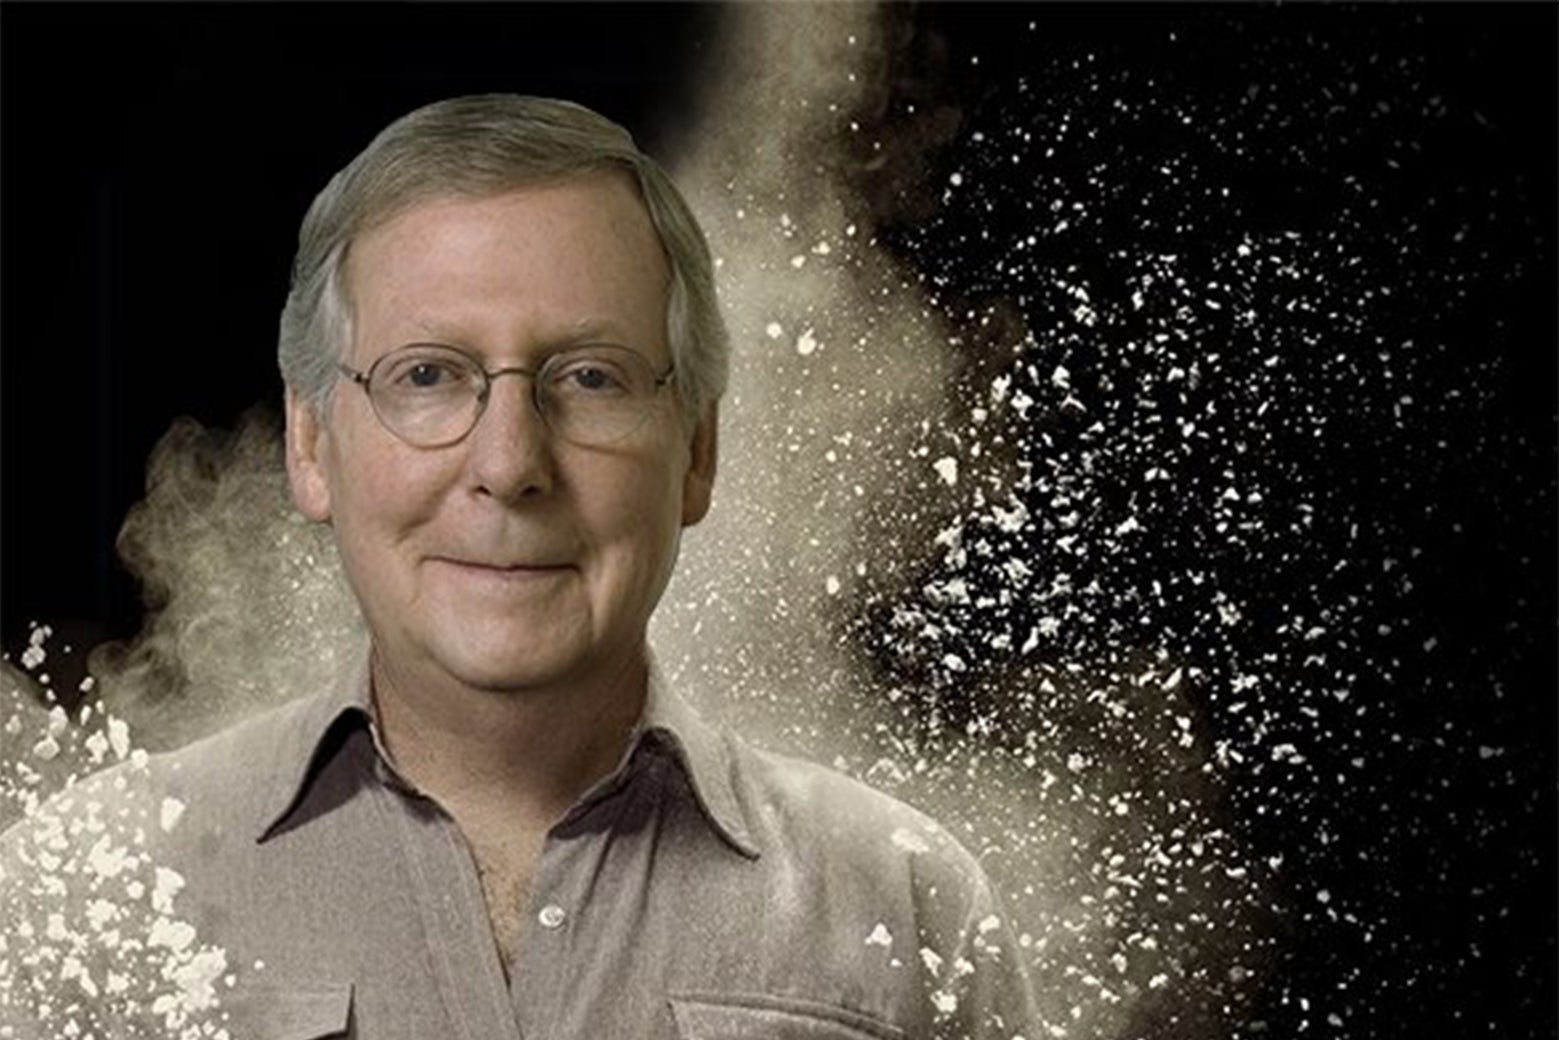 Mitch McConnell photoshopped into a promotional image from Narcos.